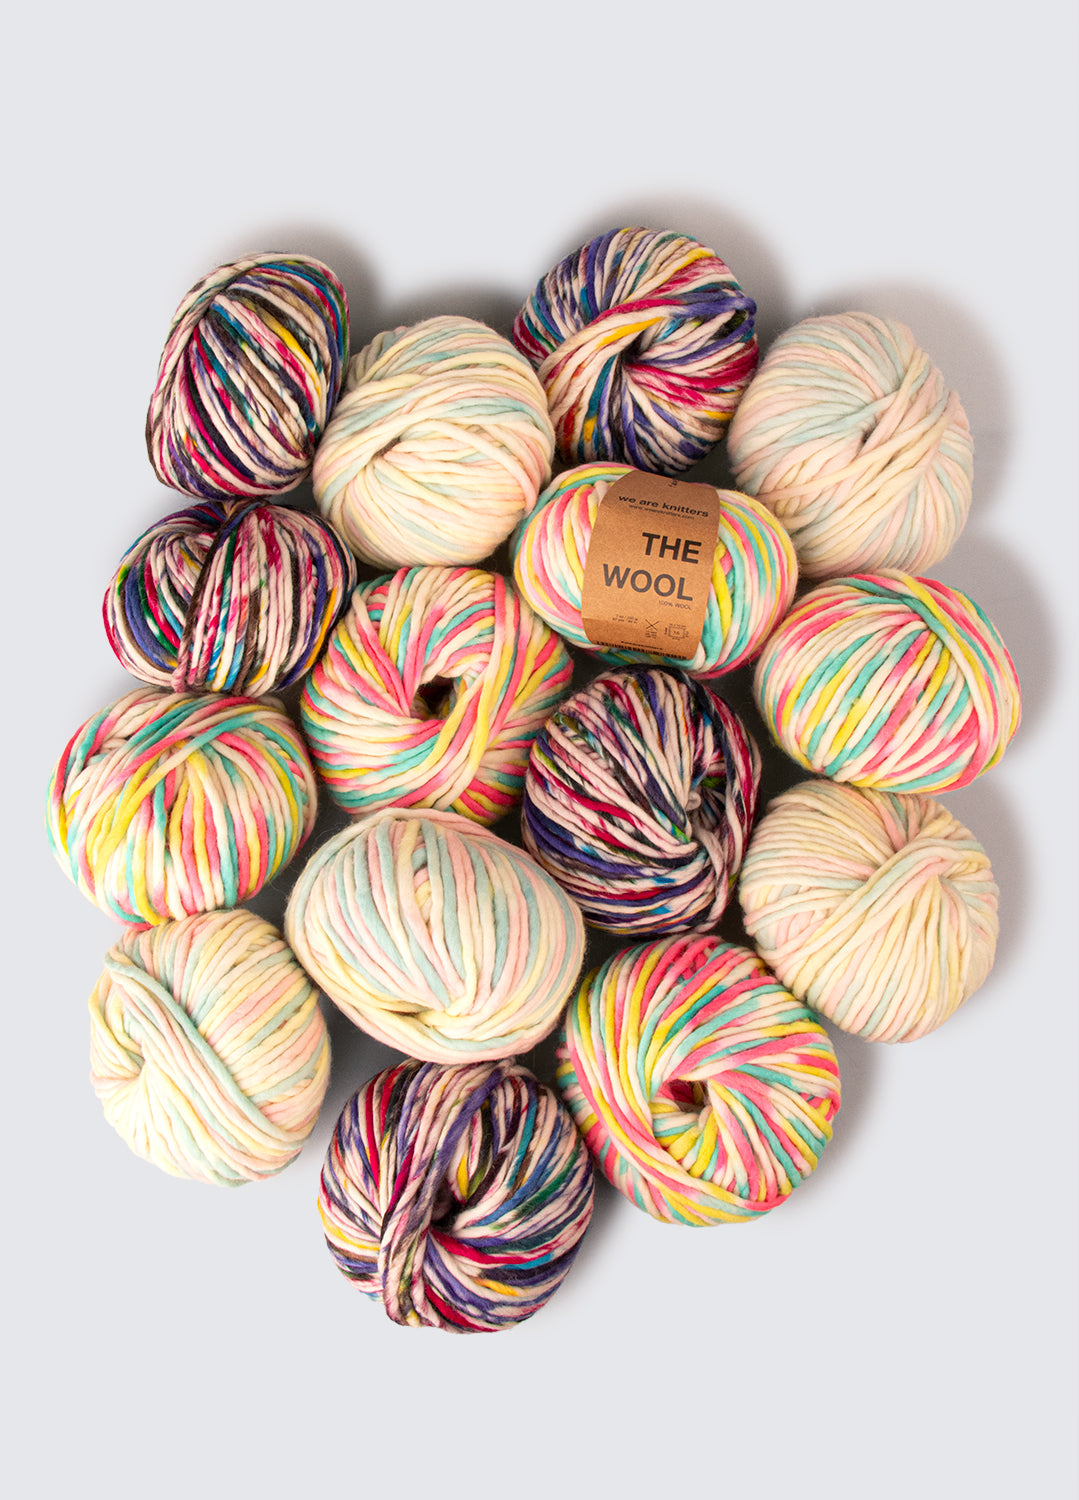 15 Pack of The Wool Yarn Balls